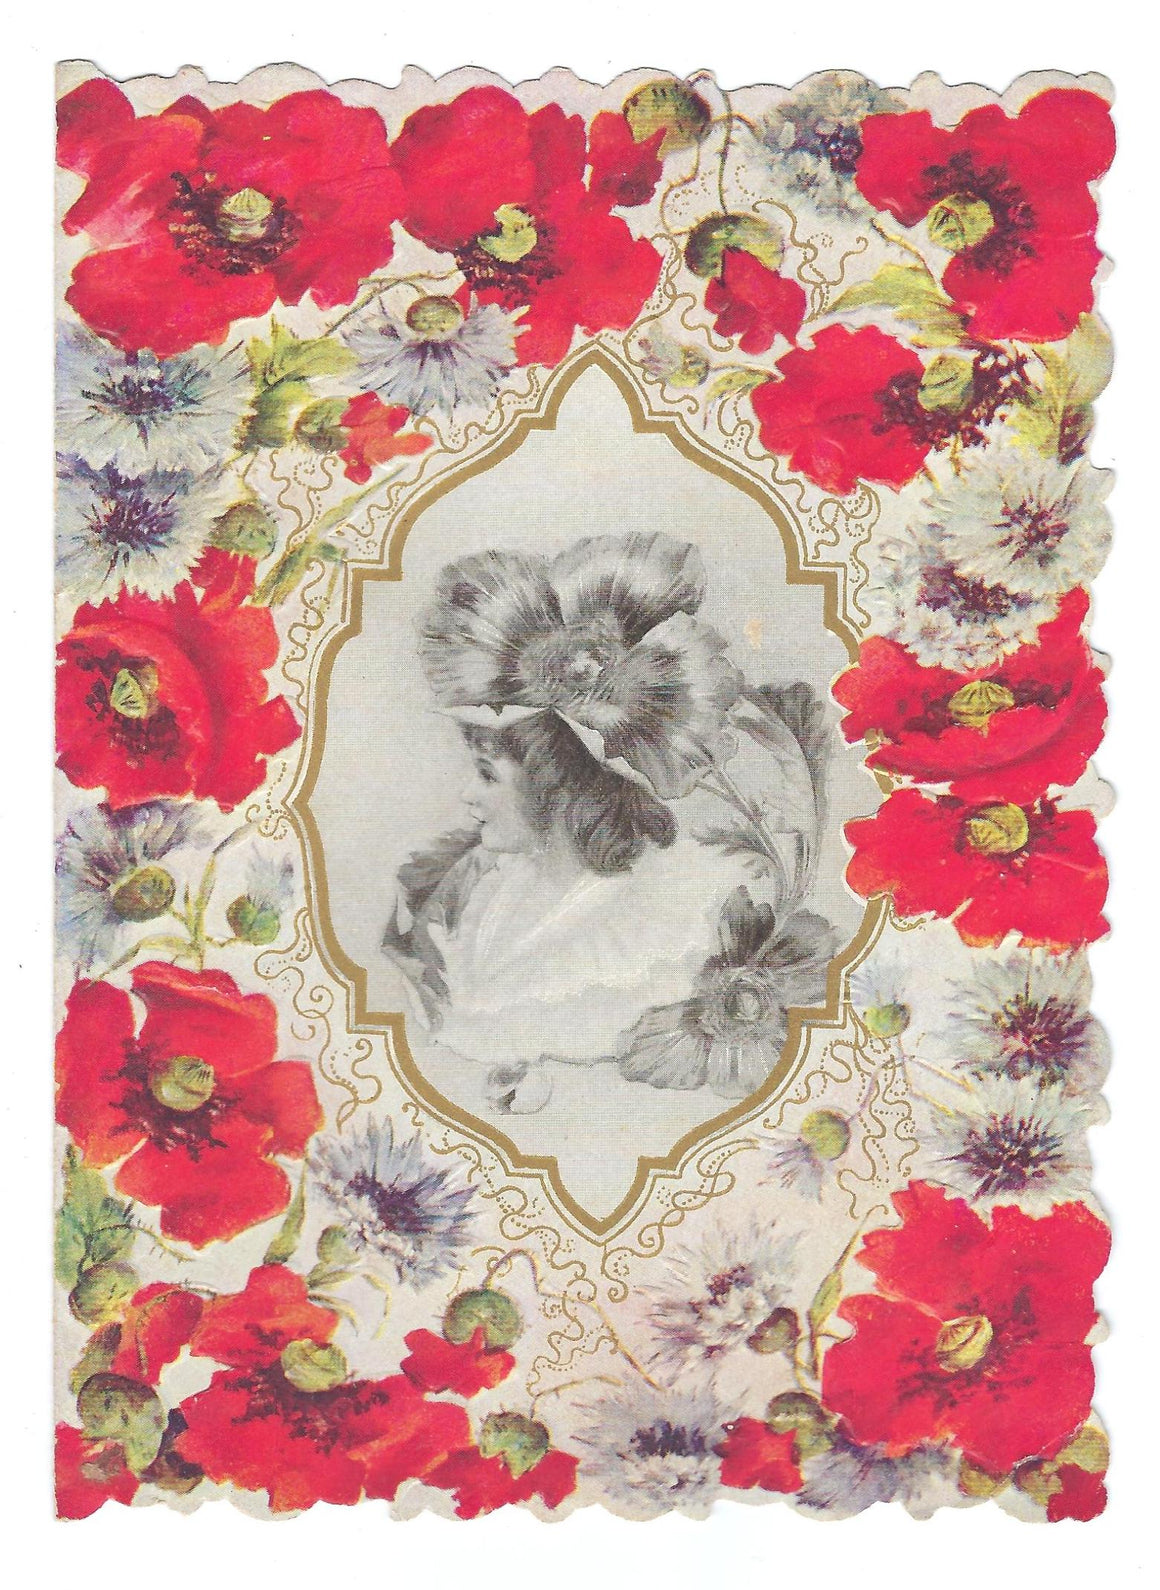 Die Cut Valentine Card Embossed Red Flowers with Monochromatic Image of Victorian Woman